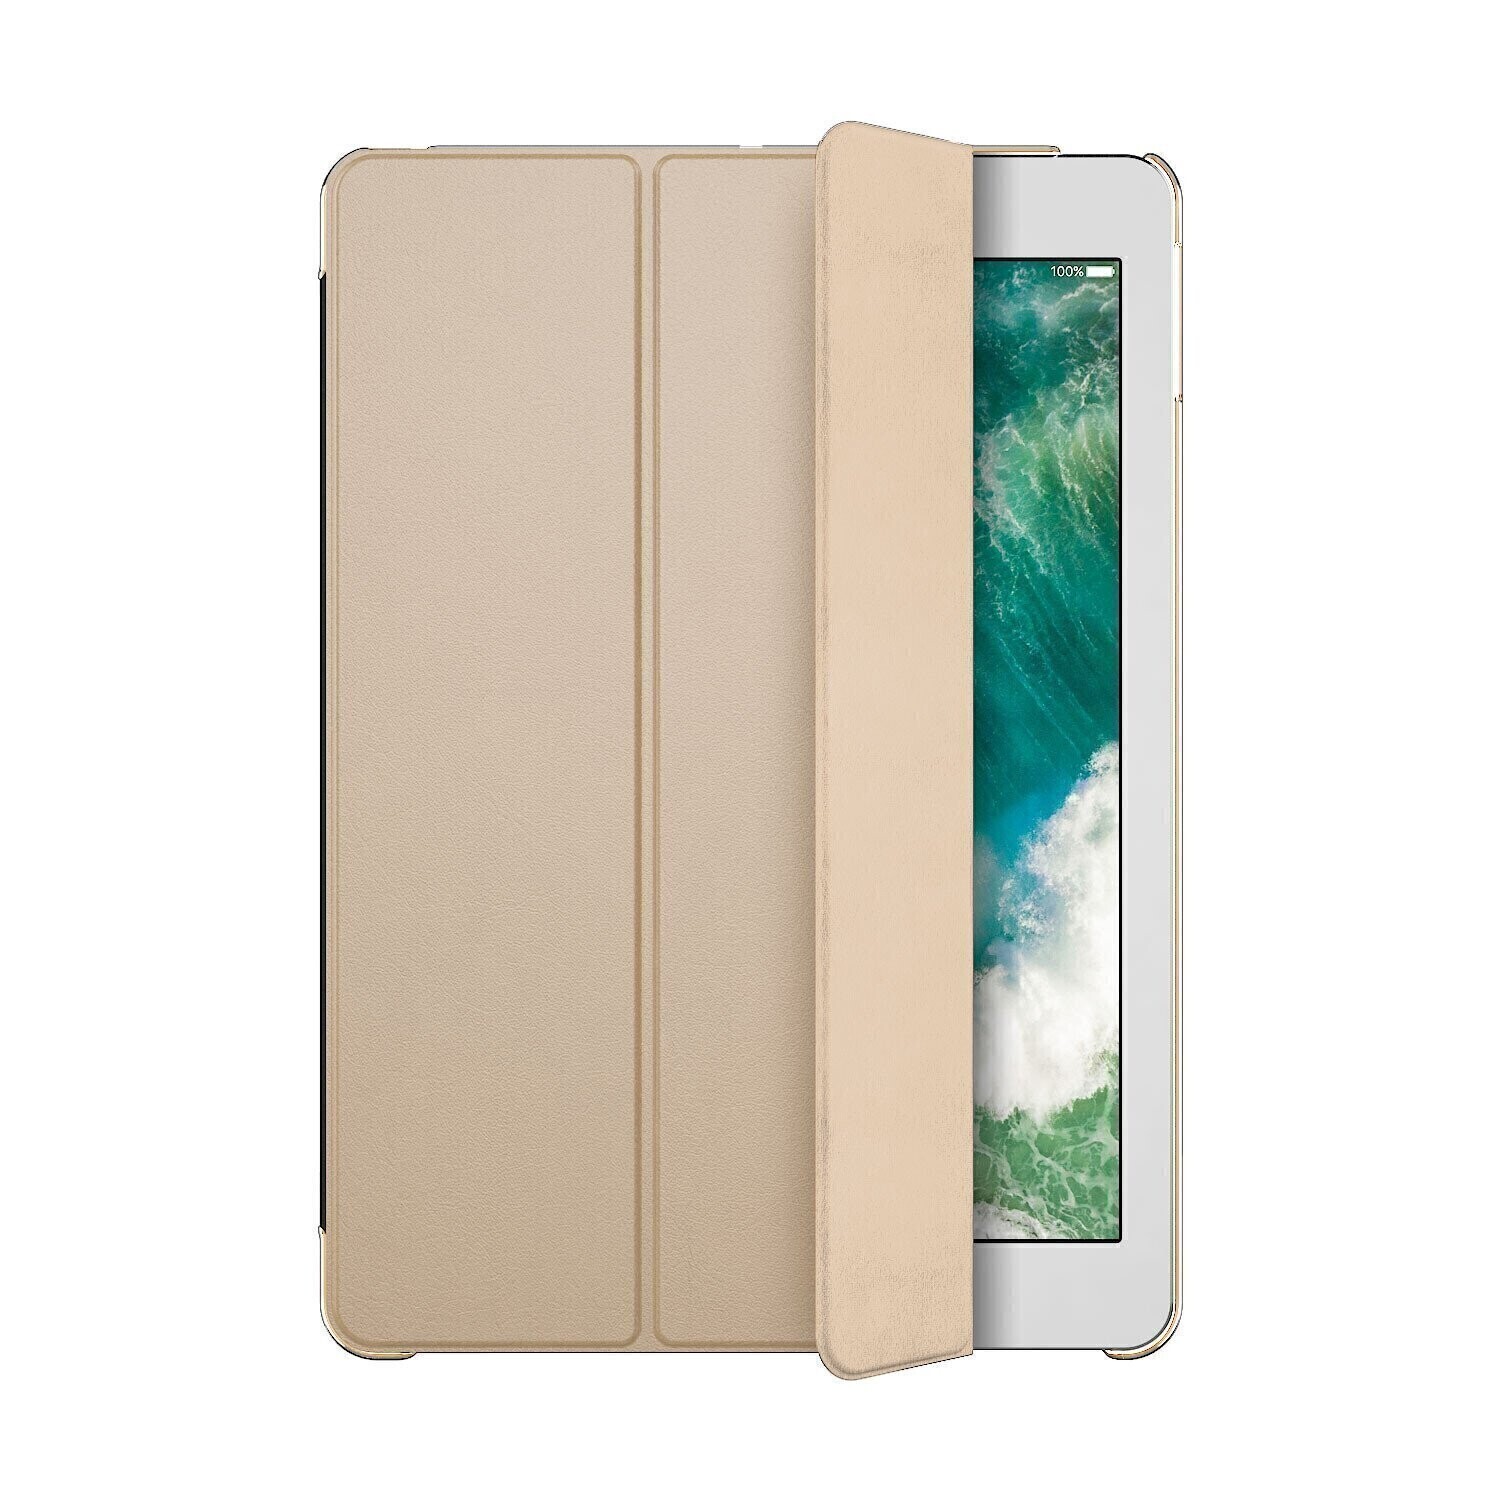 Patchworks iPad 9.7" (2017) Pure Cover Case, Gold